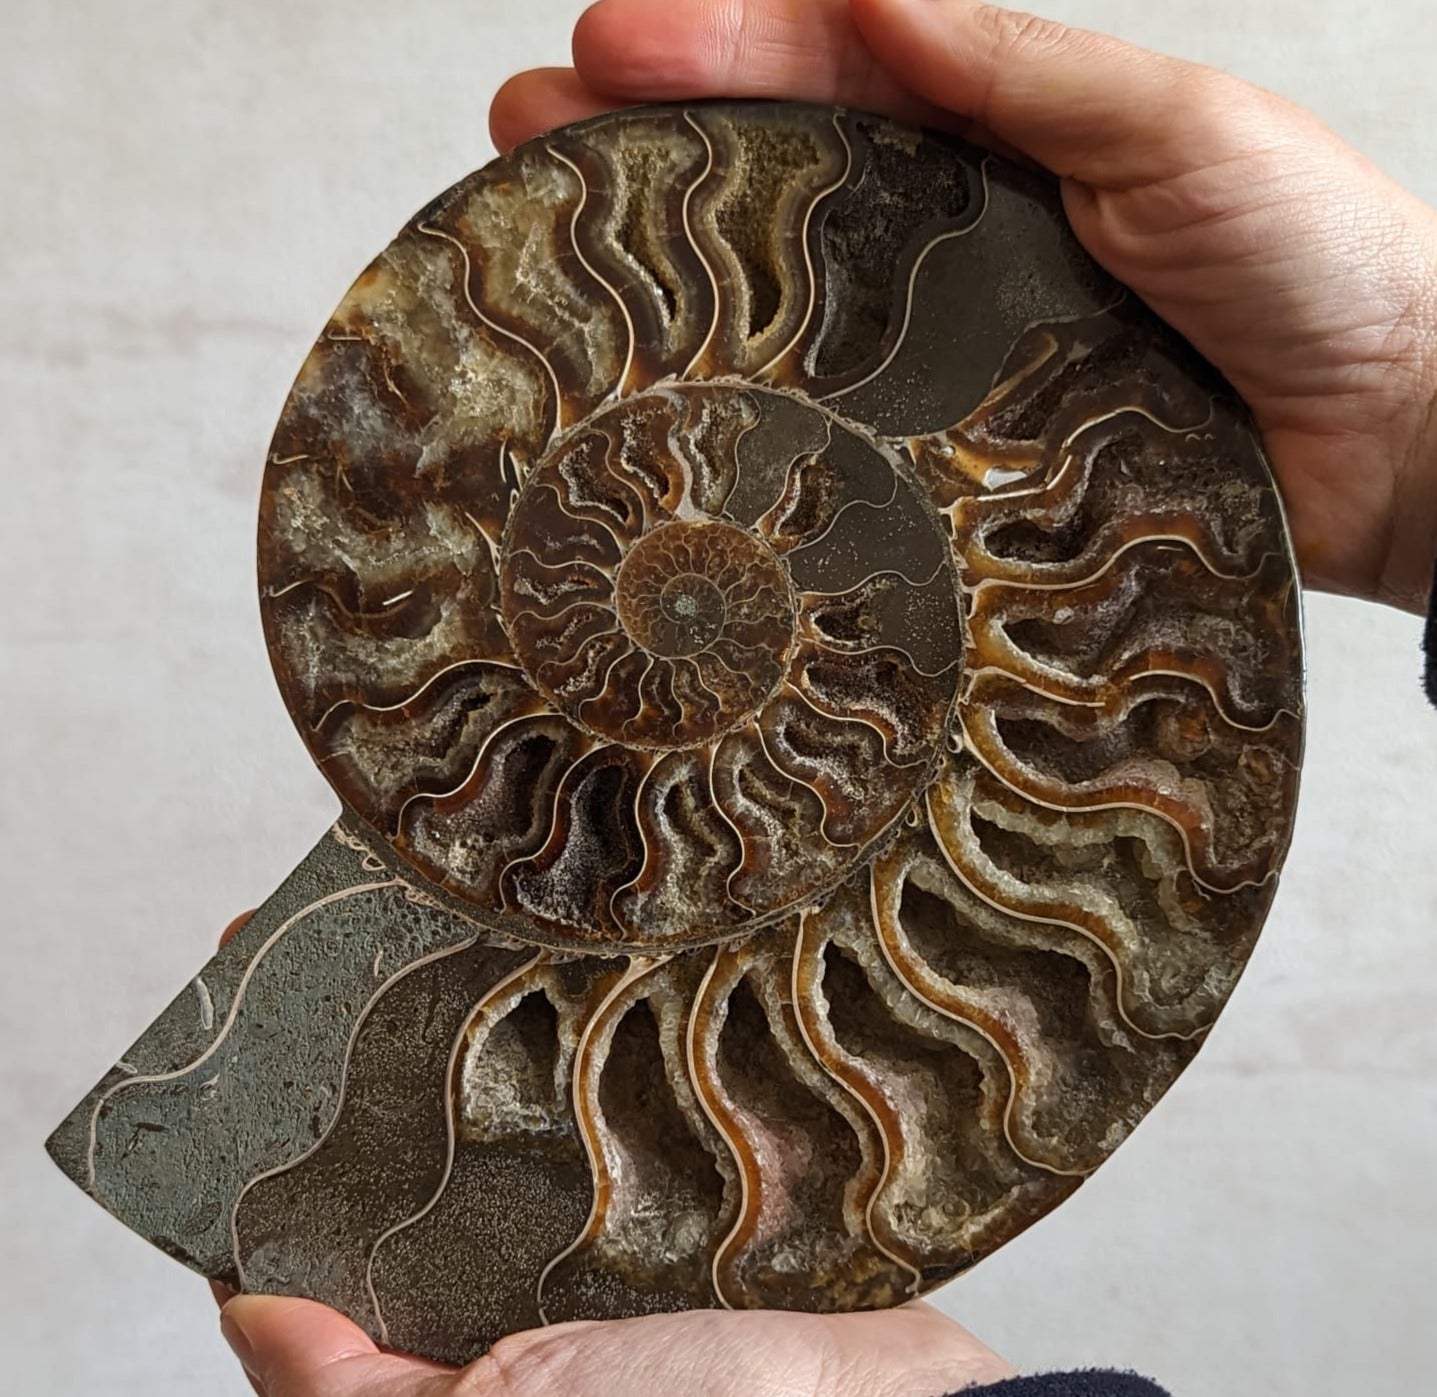 !SUPER-SIZED! 21.84cm Polished Ammonite Cross-Section Fossil from Madagascar <br>(110 million years)<br>